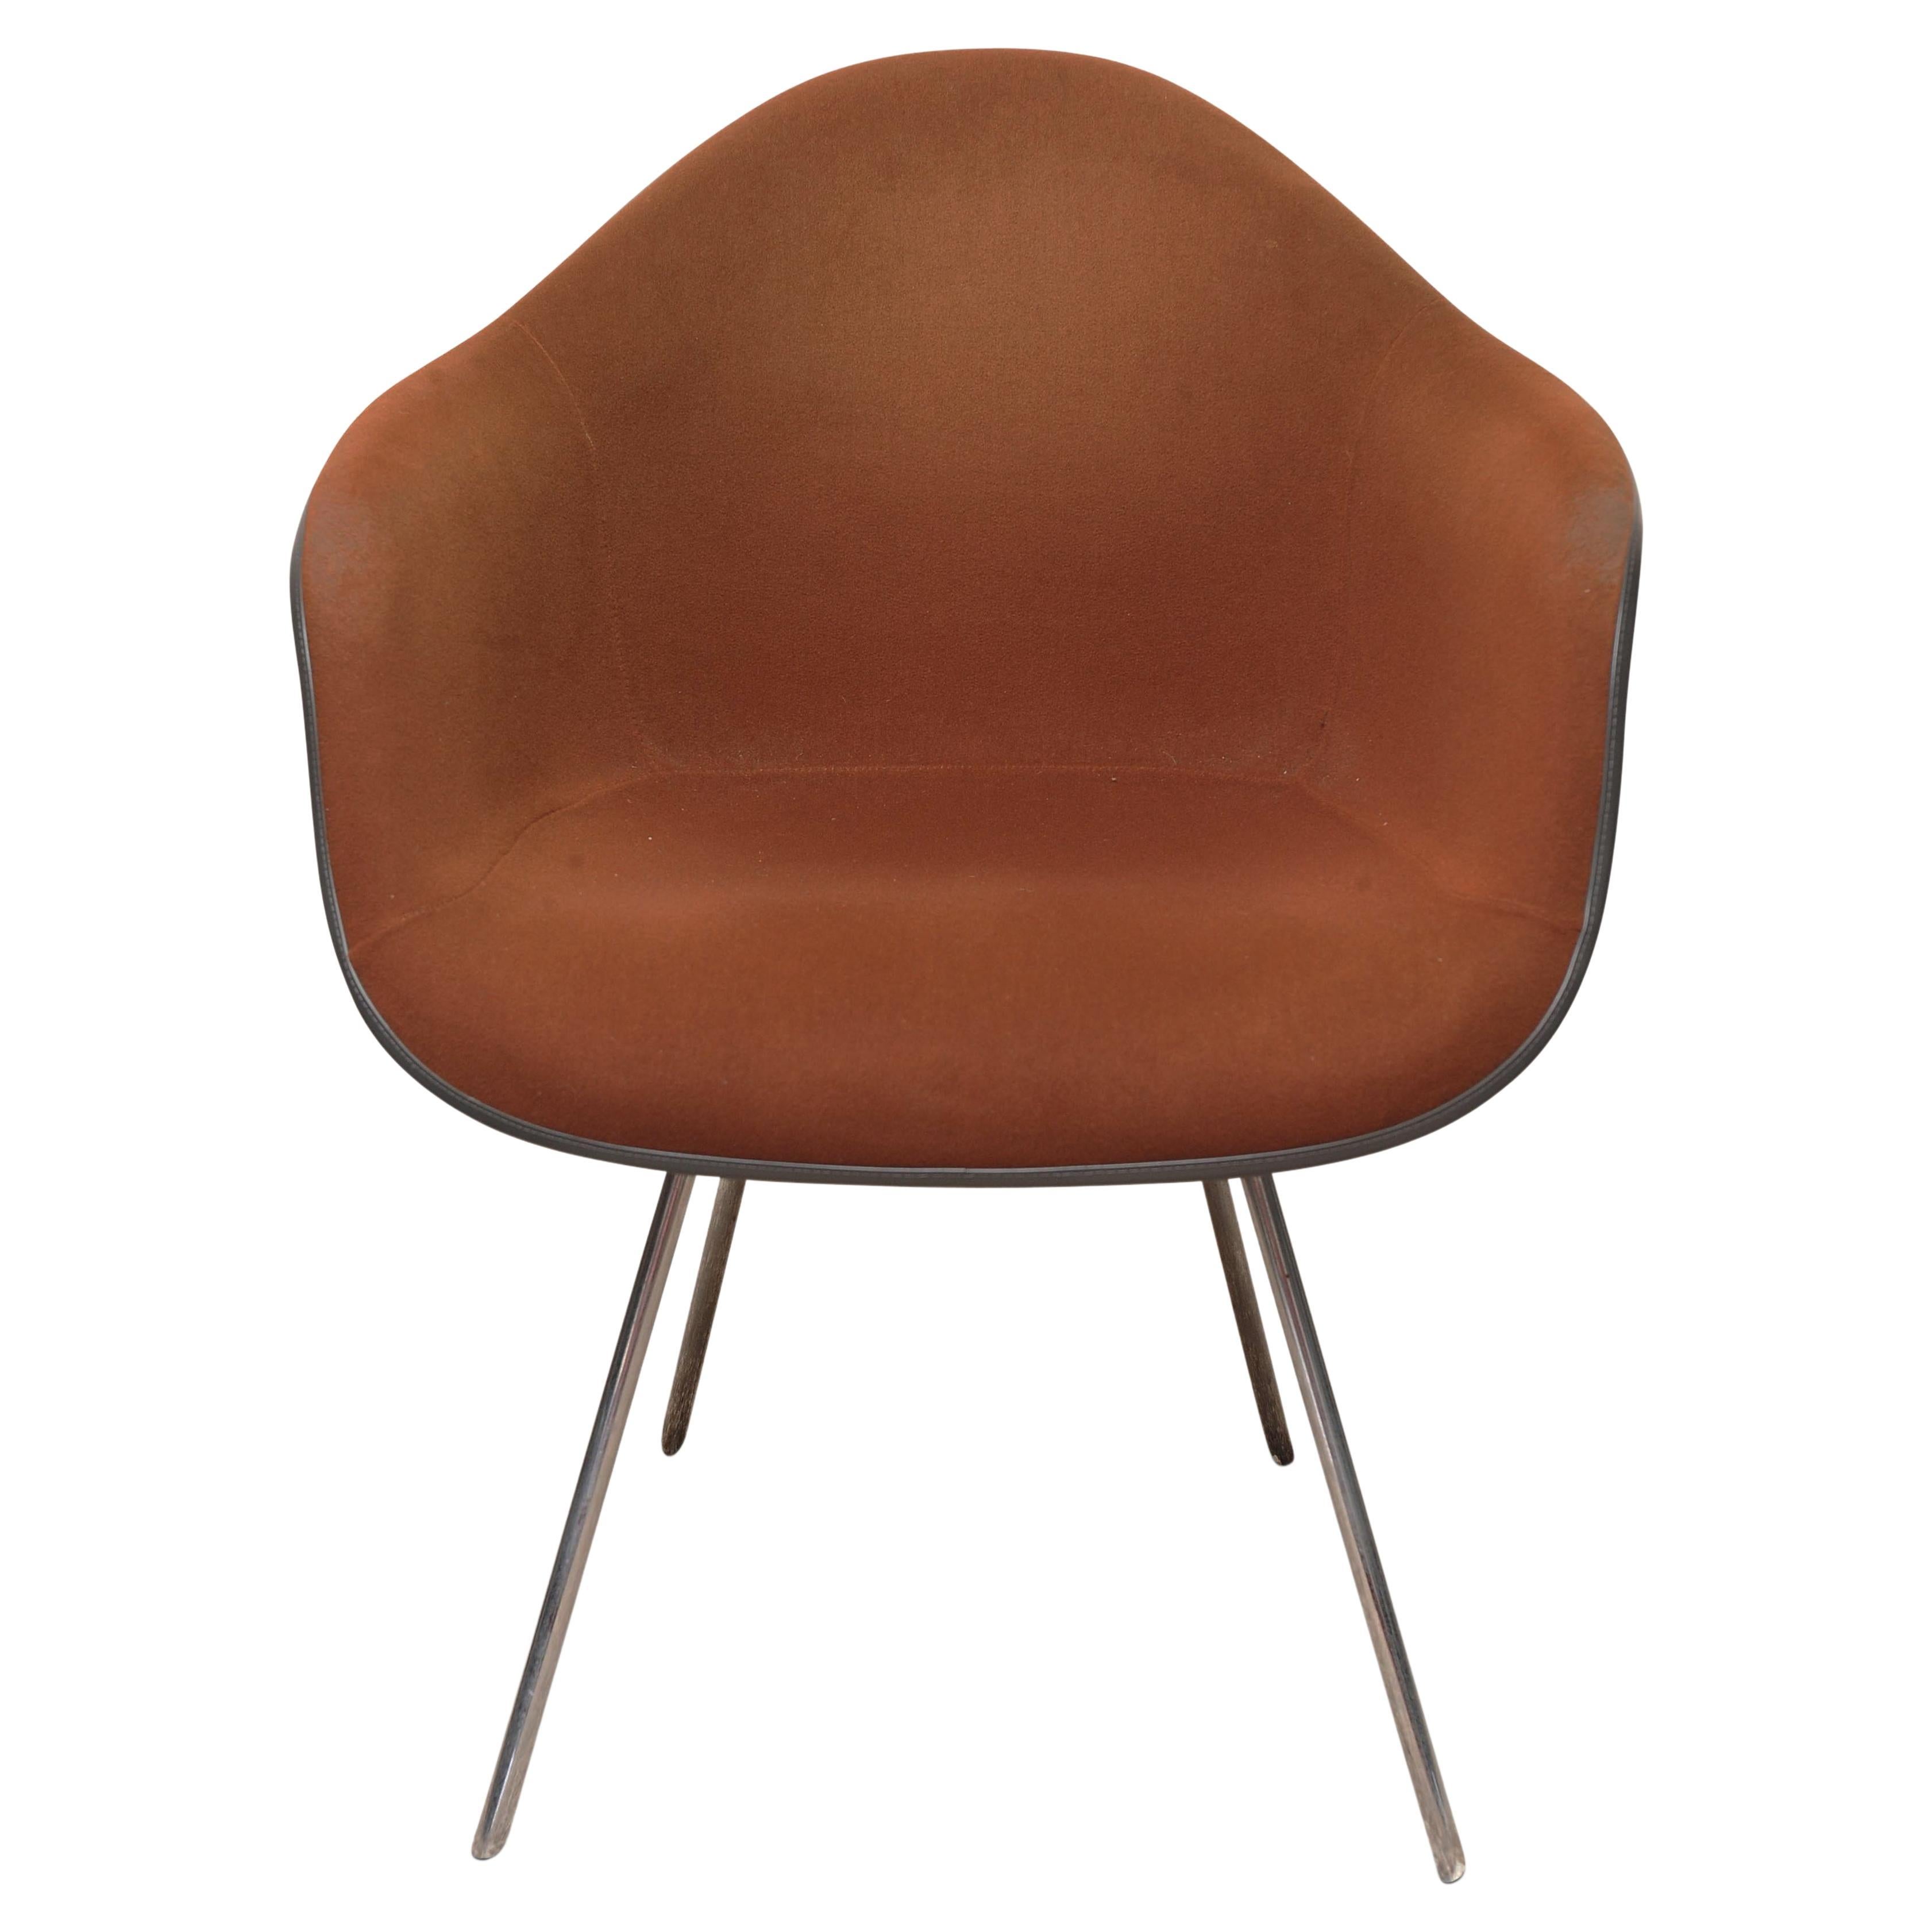 Original Mid Century Charles & Ray Eames for Herman Miller DAX Chair Labelled For Sale